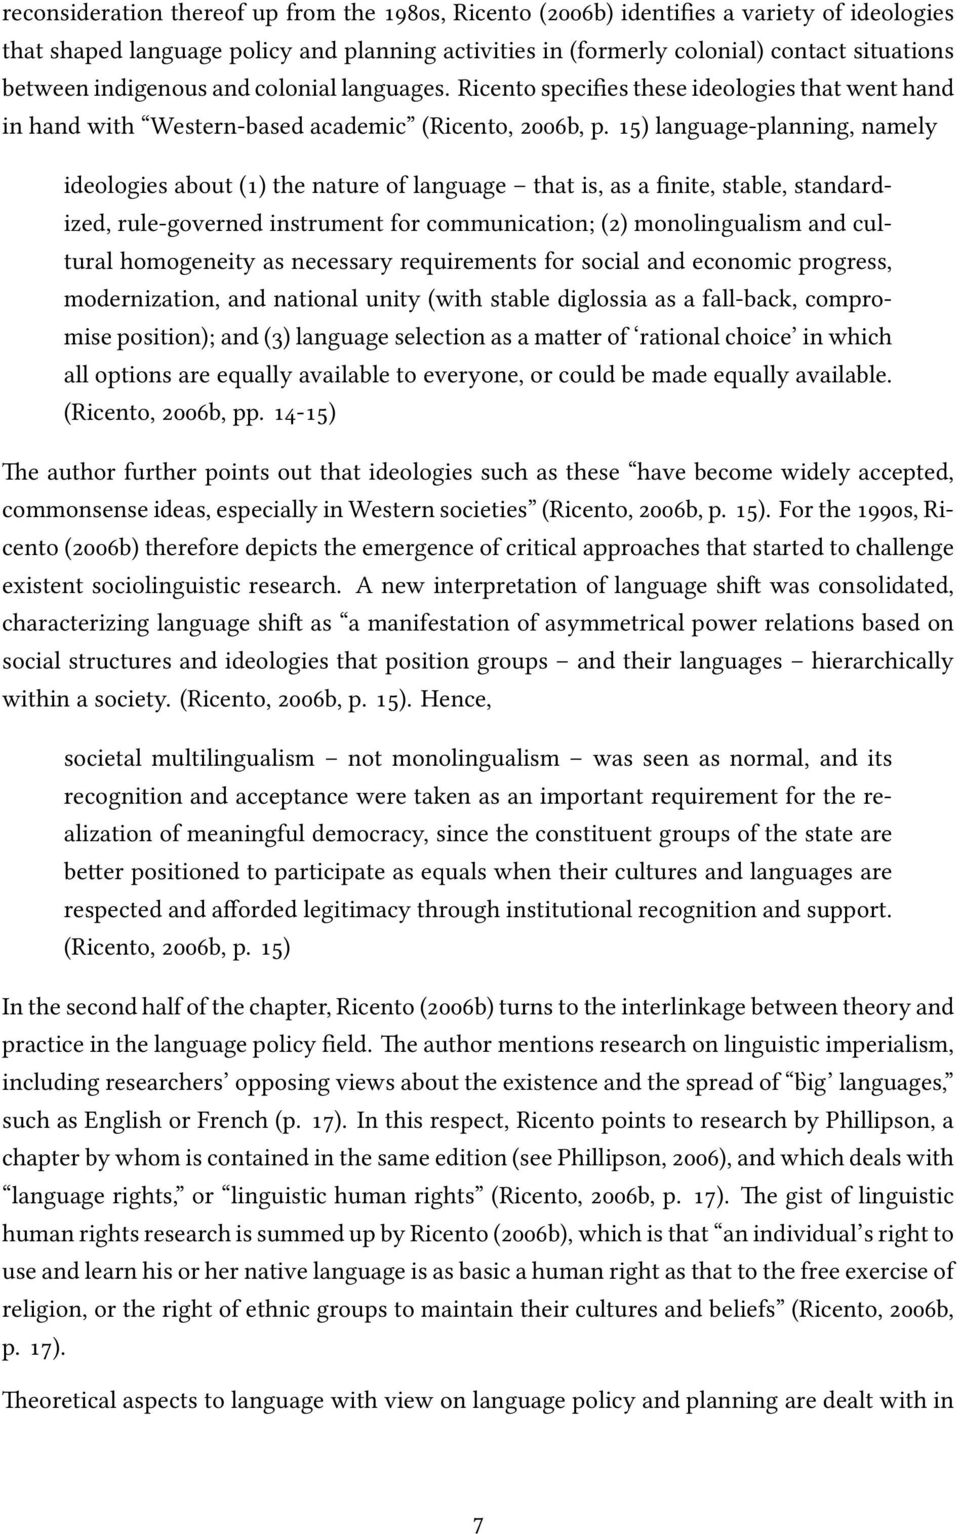 15) language-planning, namely ideologies about (1) the nature of language that is, as a finite, stable, standardized, rule-governed instrument for communication; (2) monolingualism and cultural